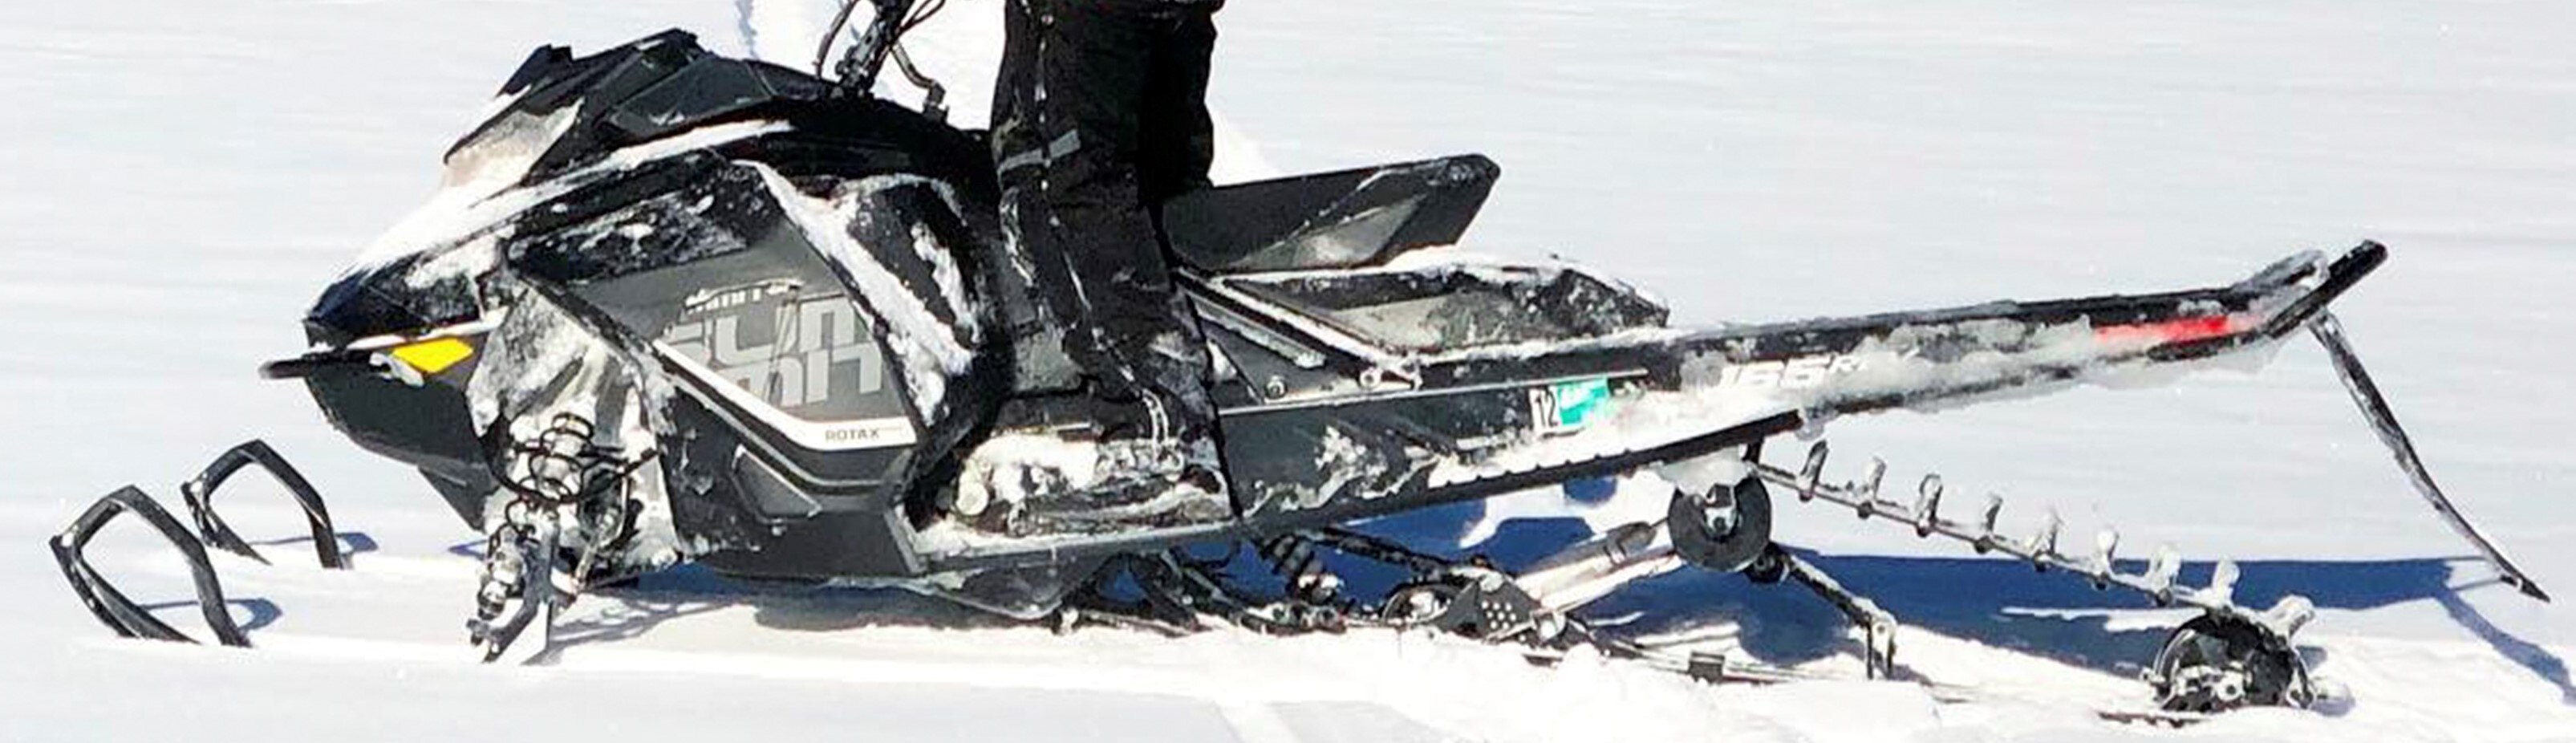 Ski-Doo rider looking at other riders